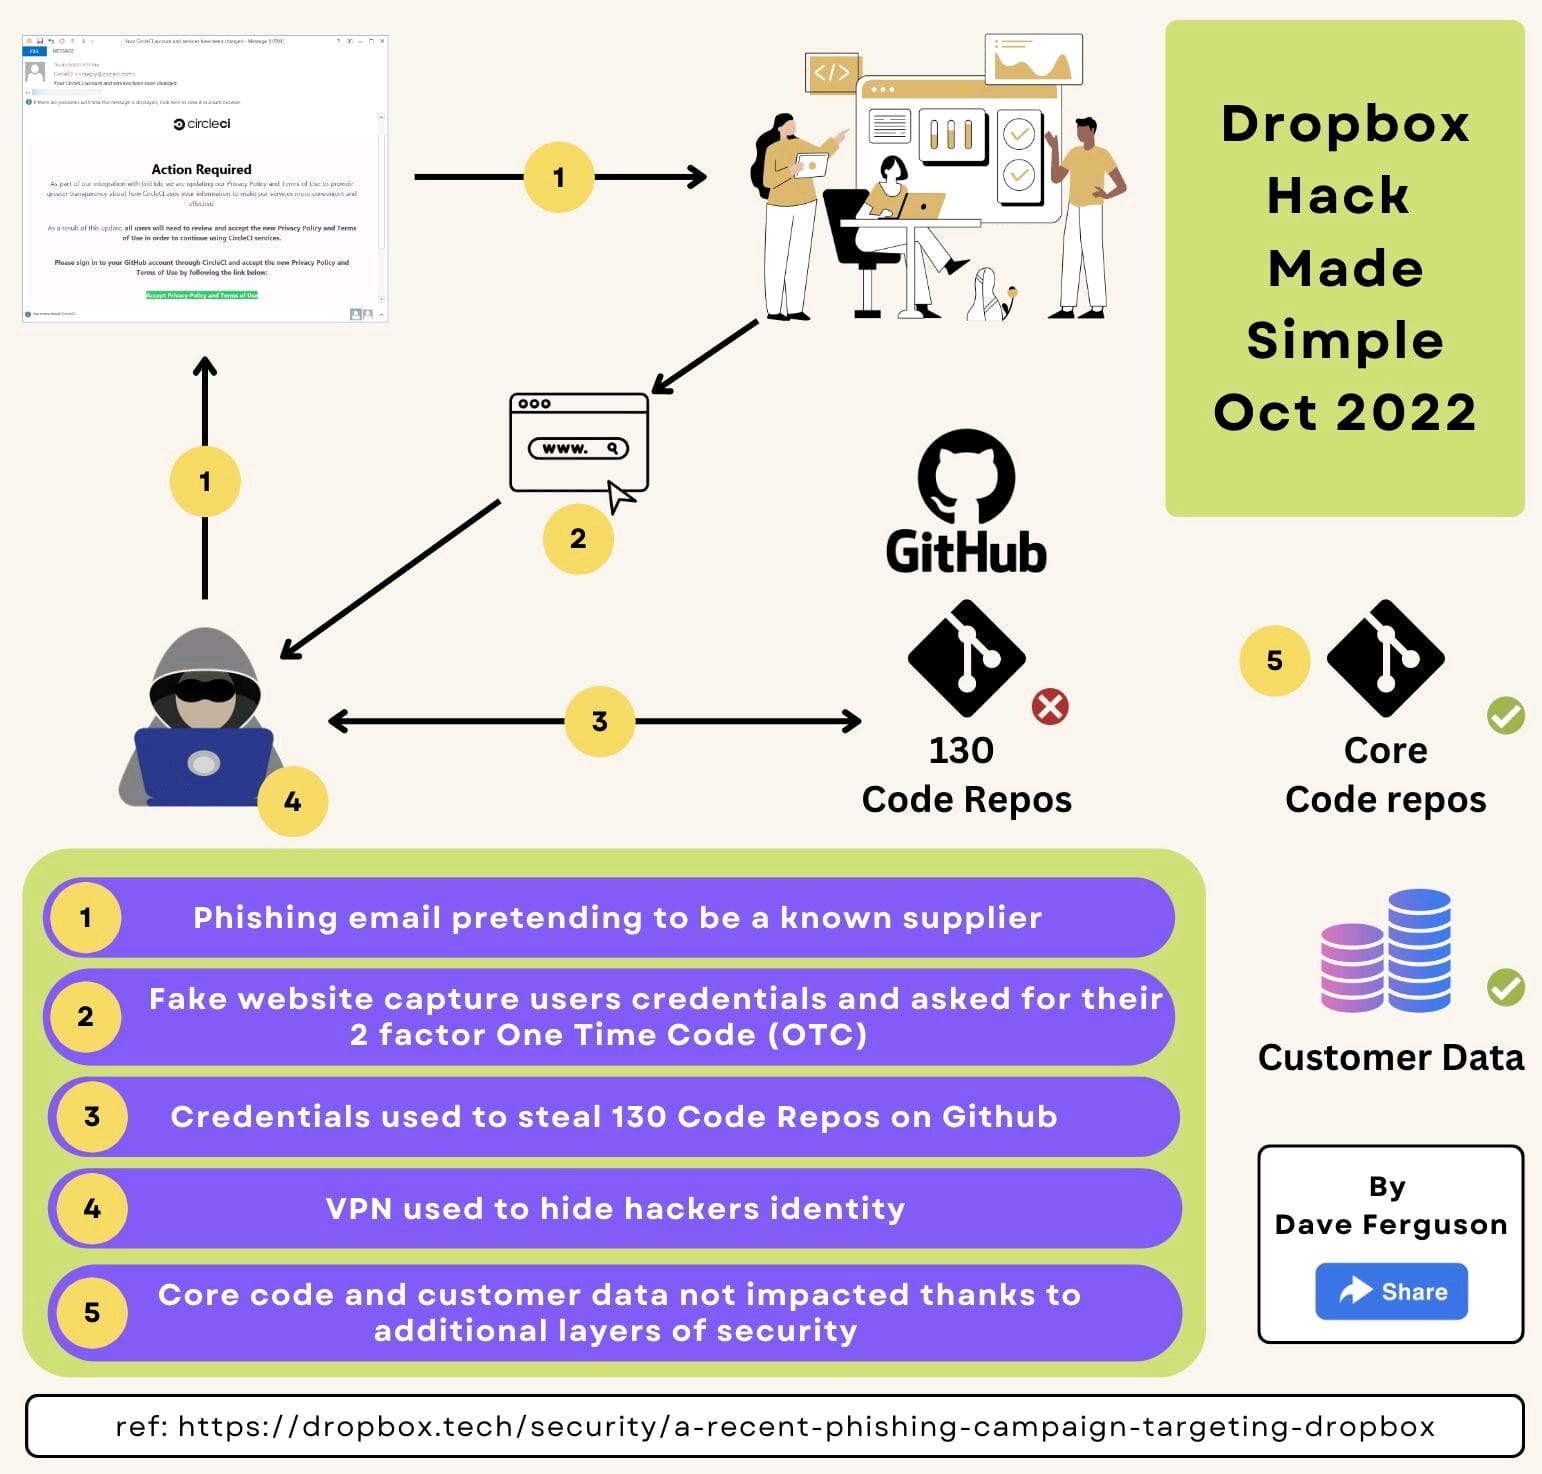 The incident details shared by Dropbox